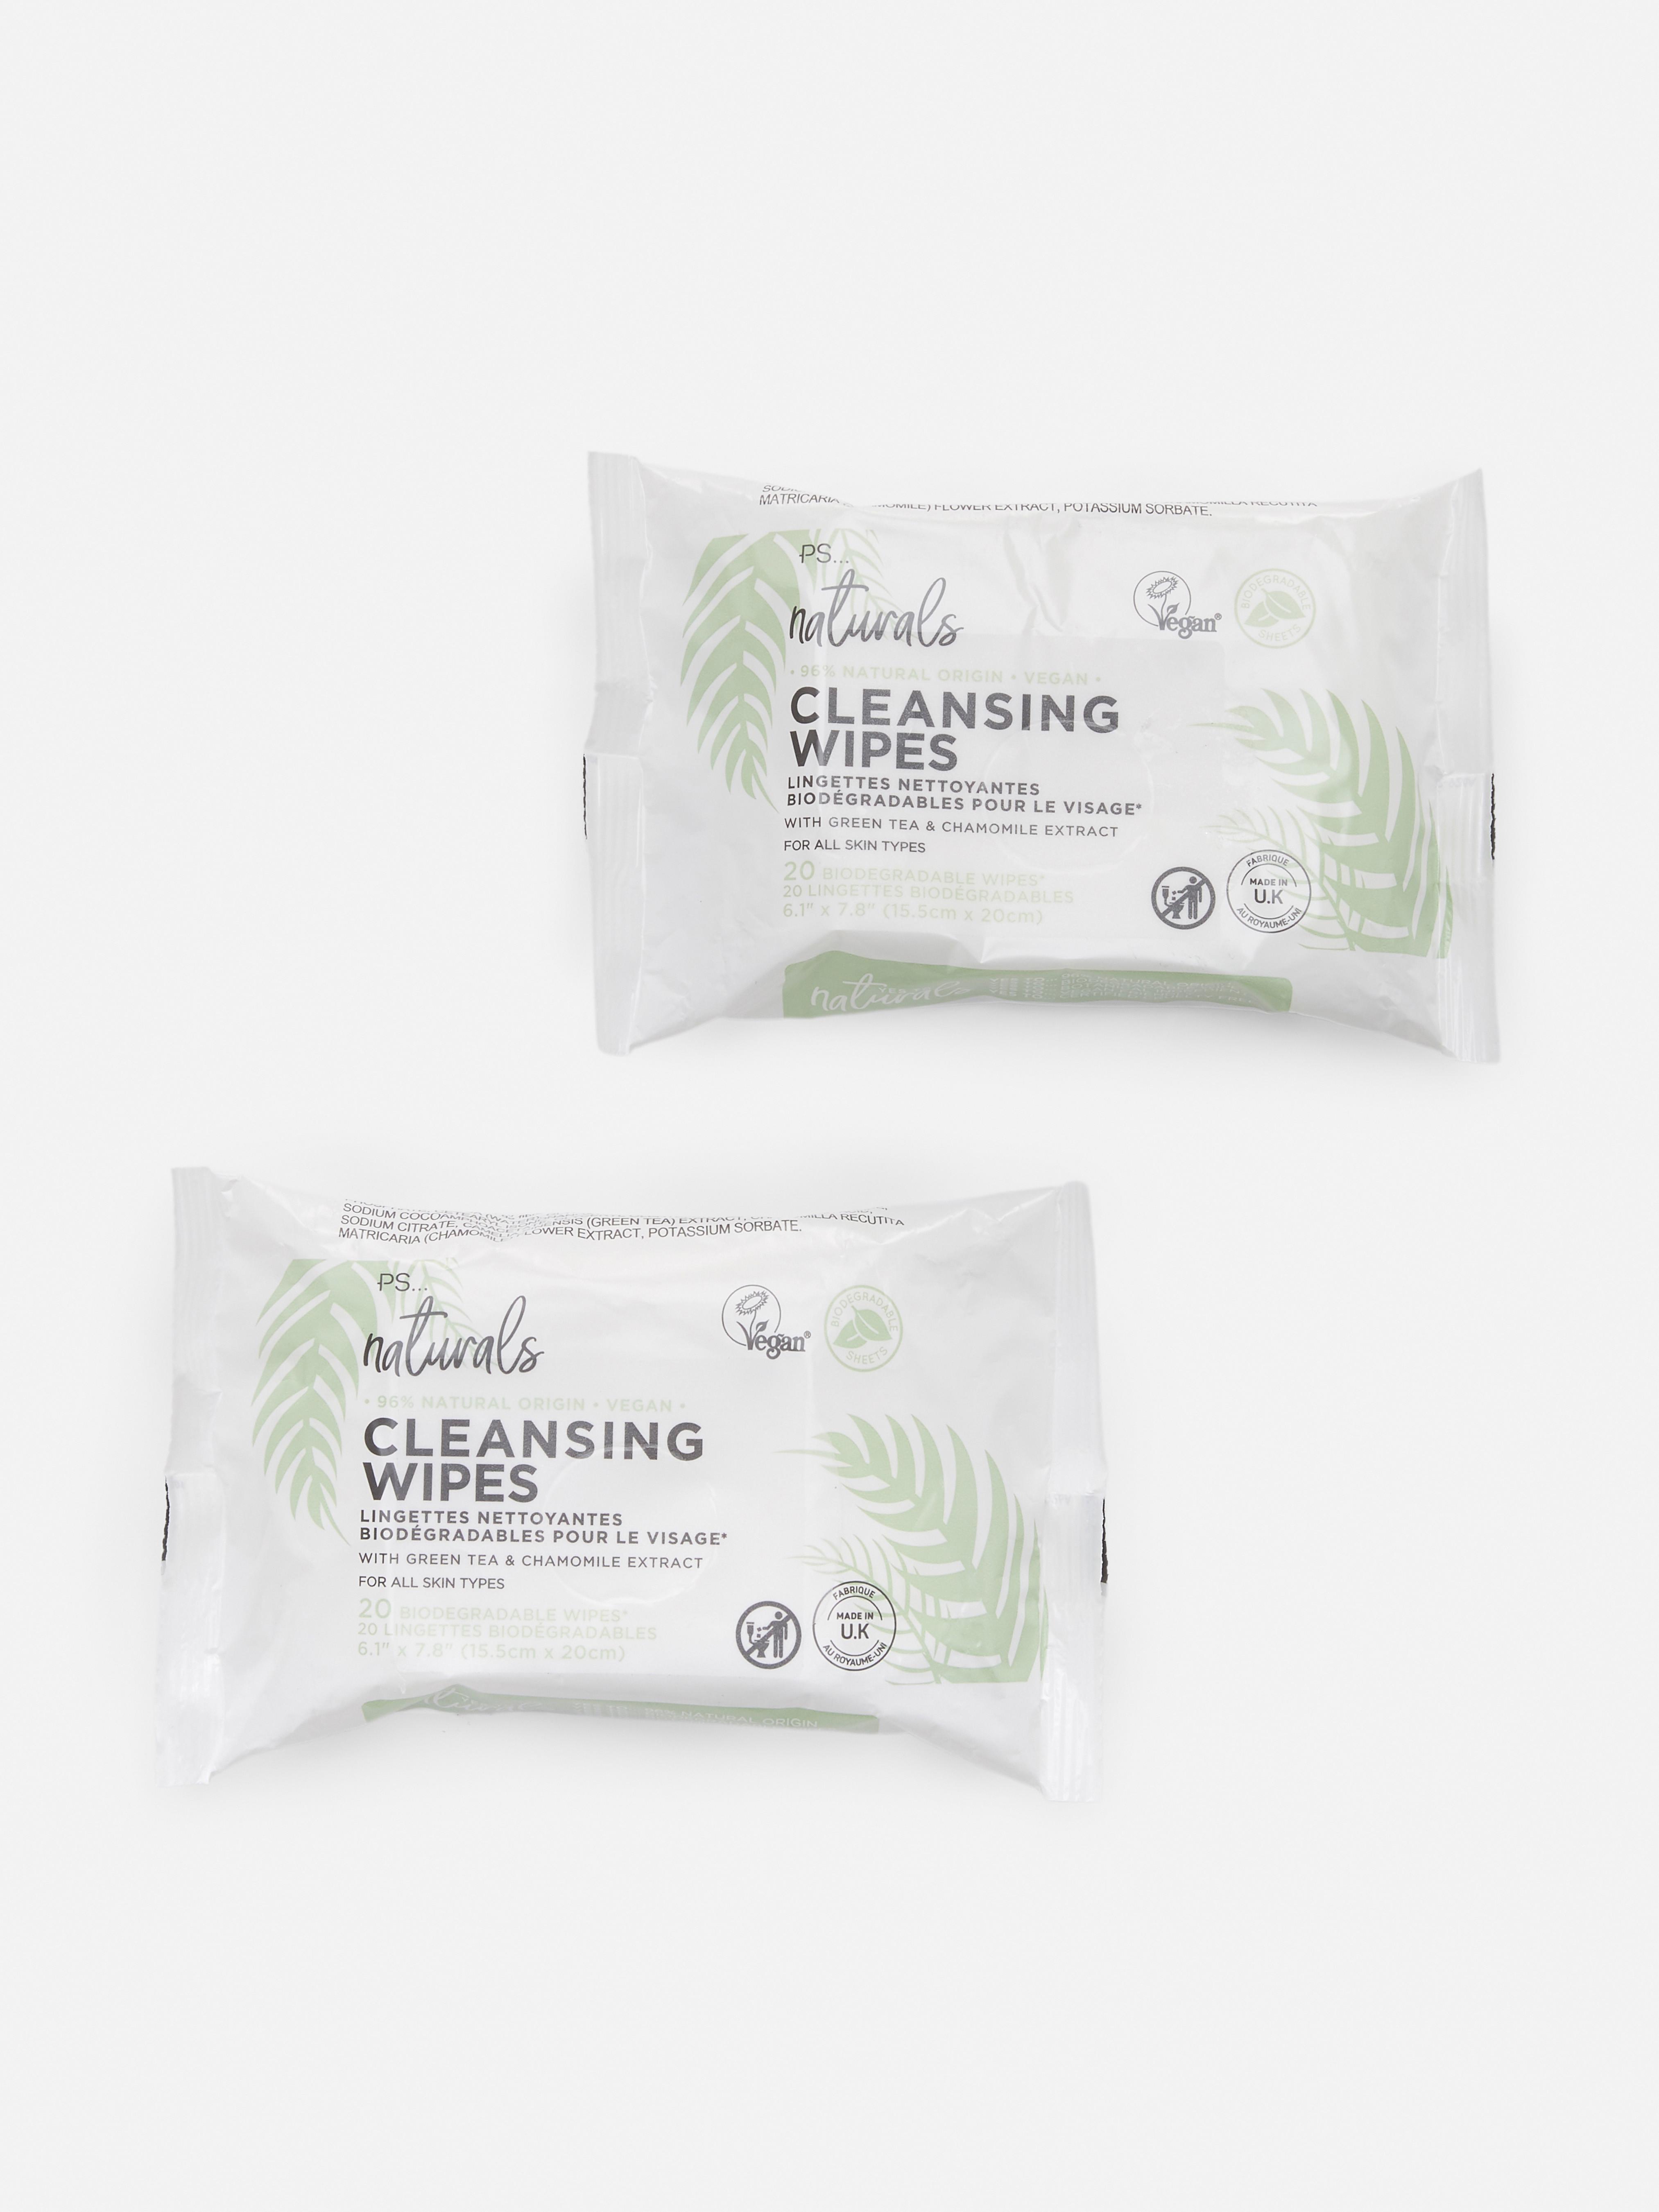 PS... Naturals Cleansing Wipes